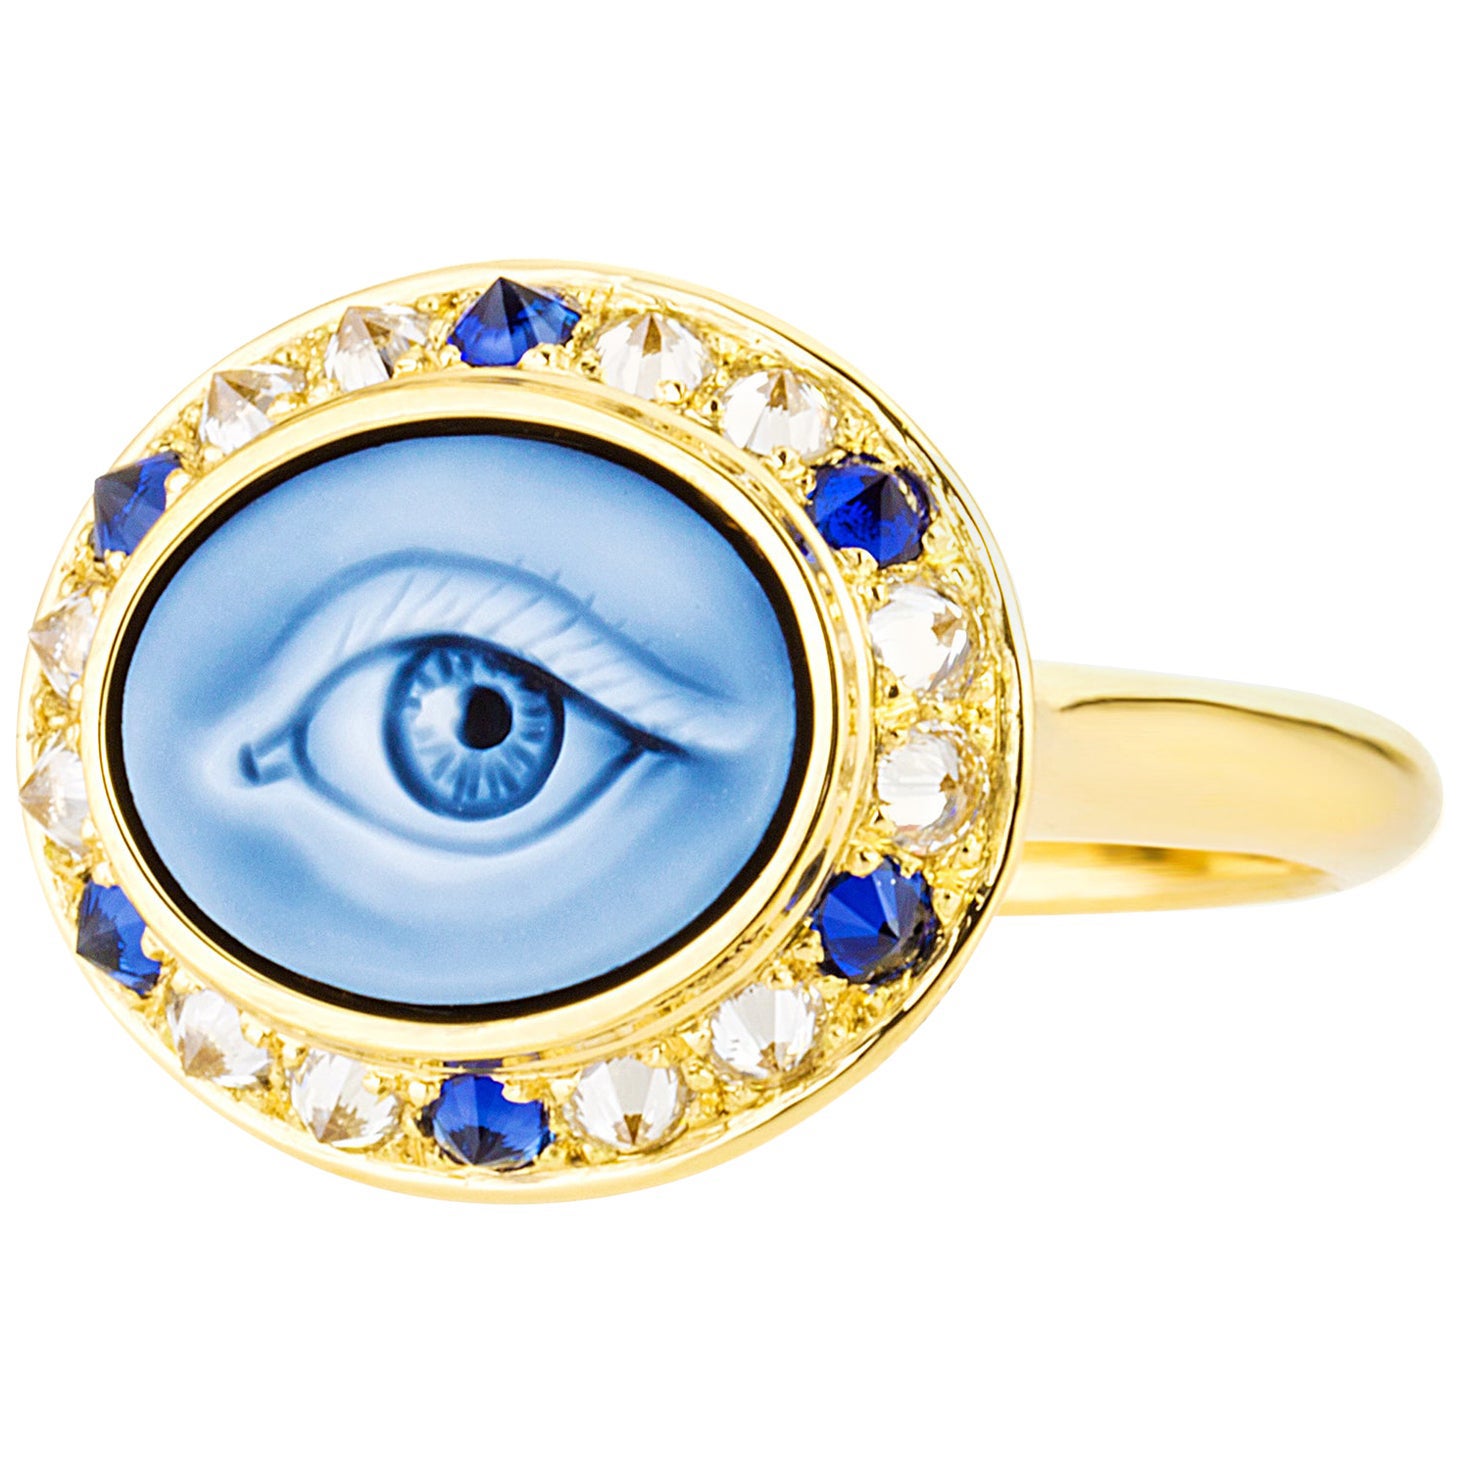 AnaKatarina Customizable Carved Agate Cameo, 18k Gold, Diamonds 'Eye Love' Ring For Sale